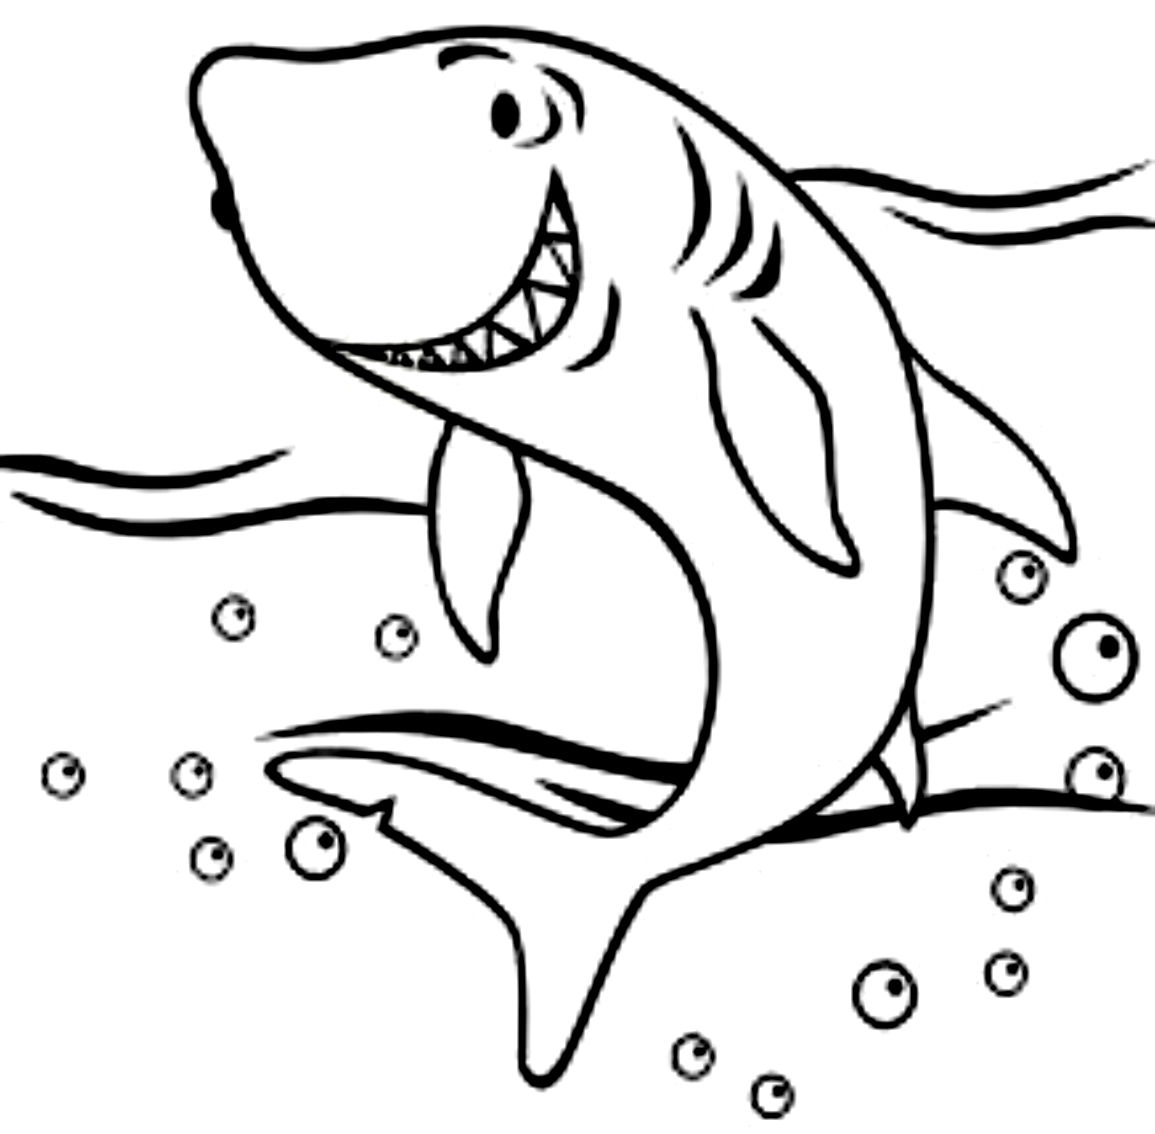 Drawing 19 from Sharks coloring page to print and coloring